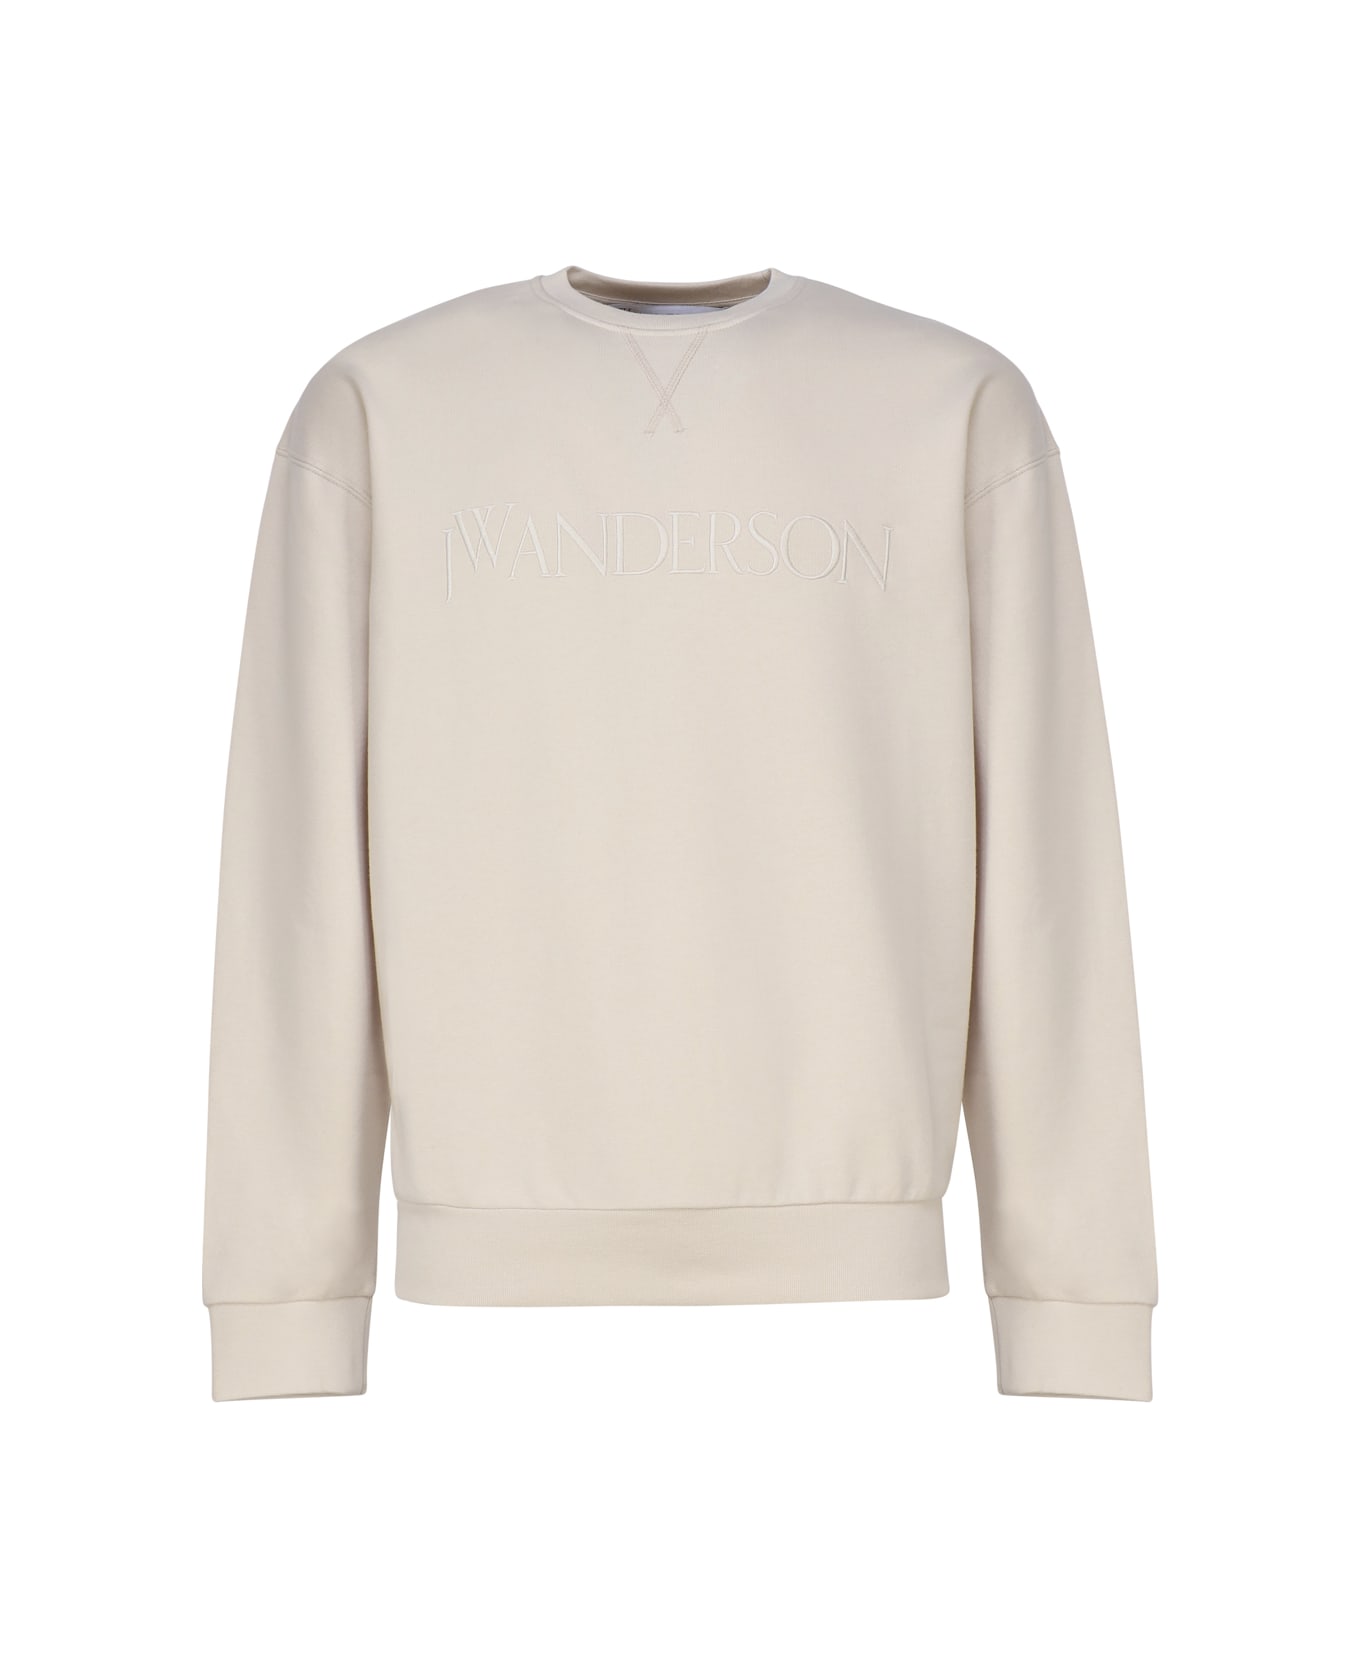 J.W. Anderson Sweatshirt With Embroidery - White